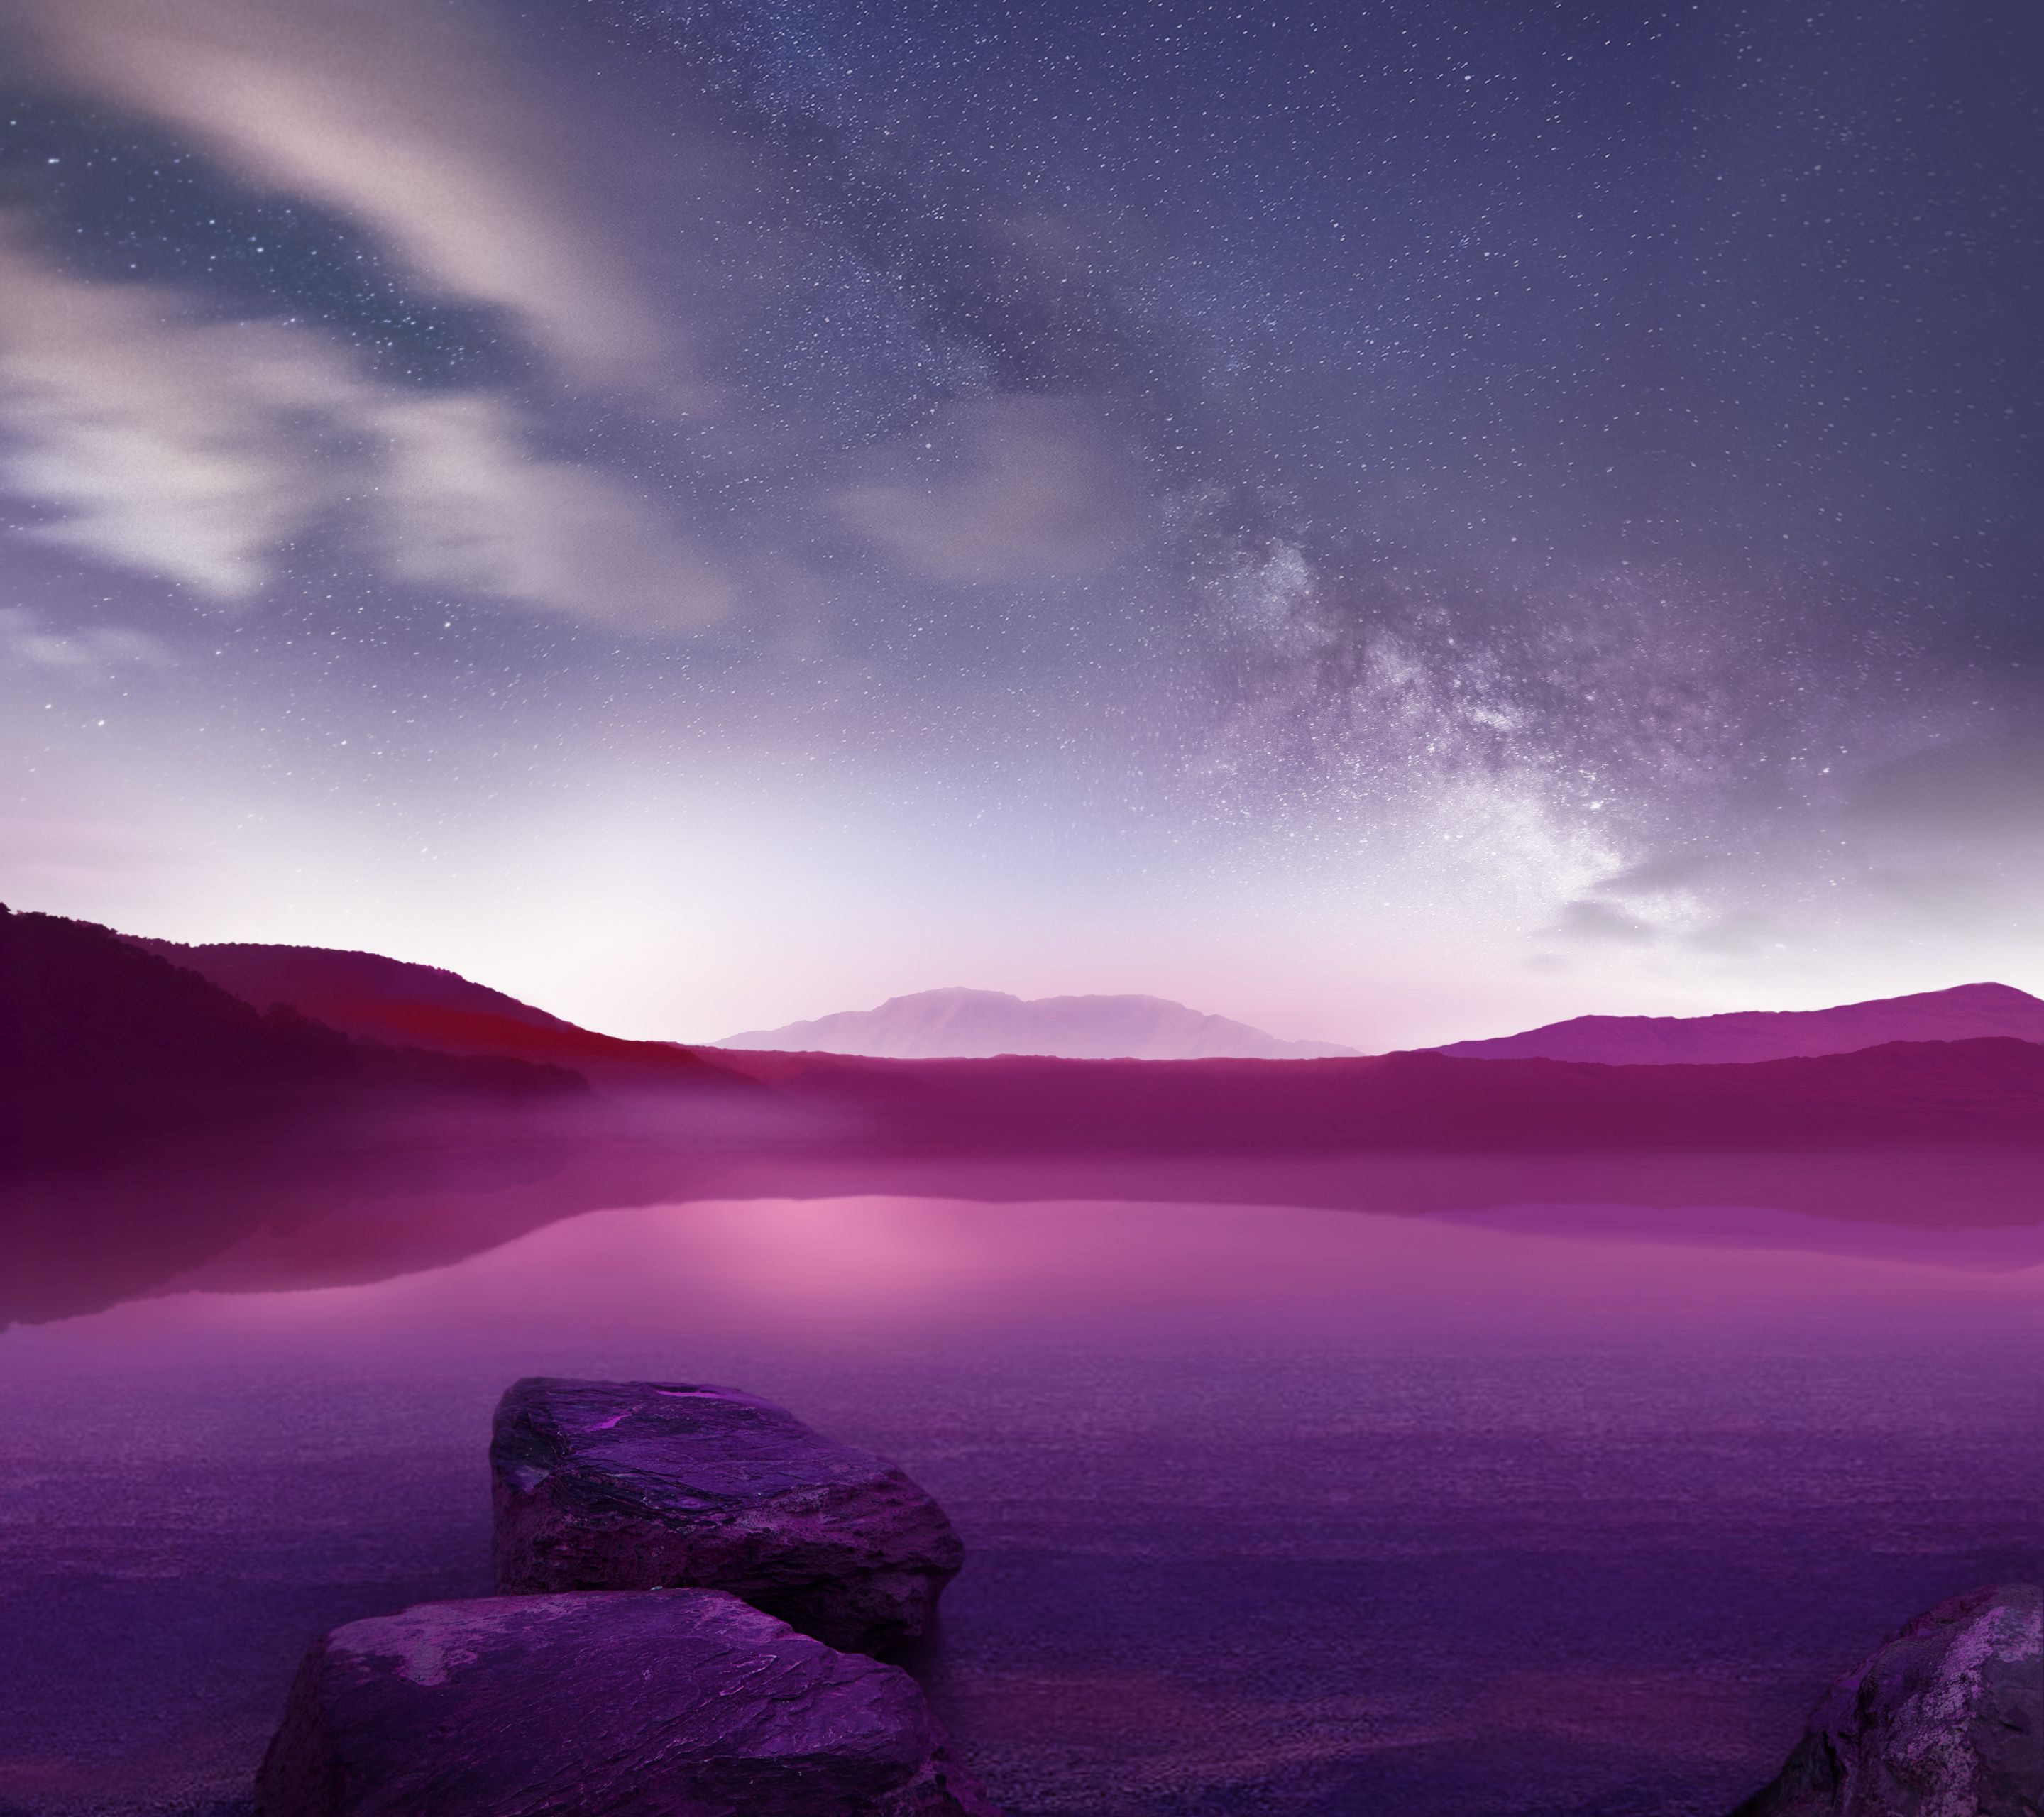 Download: LG G3 wallpapers for your phone